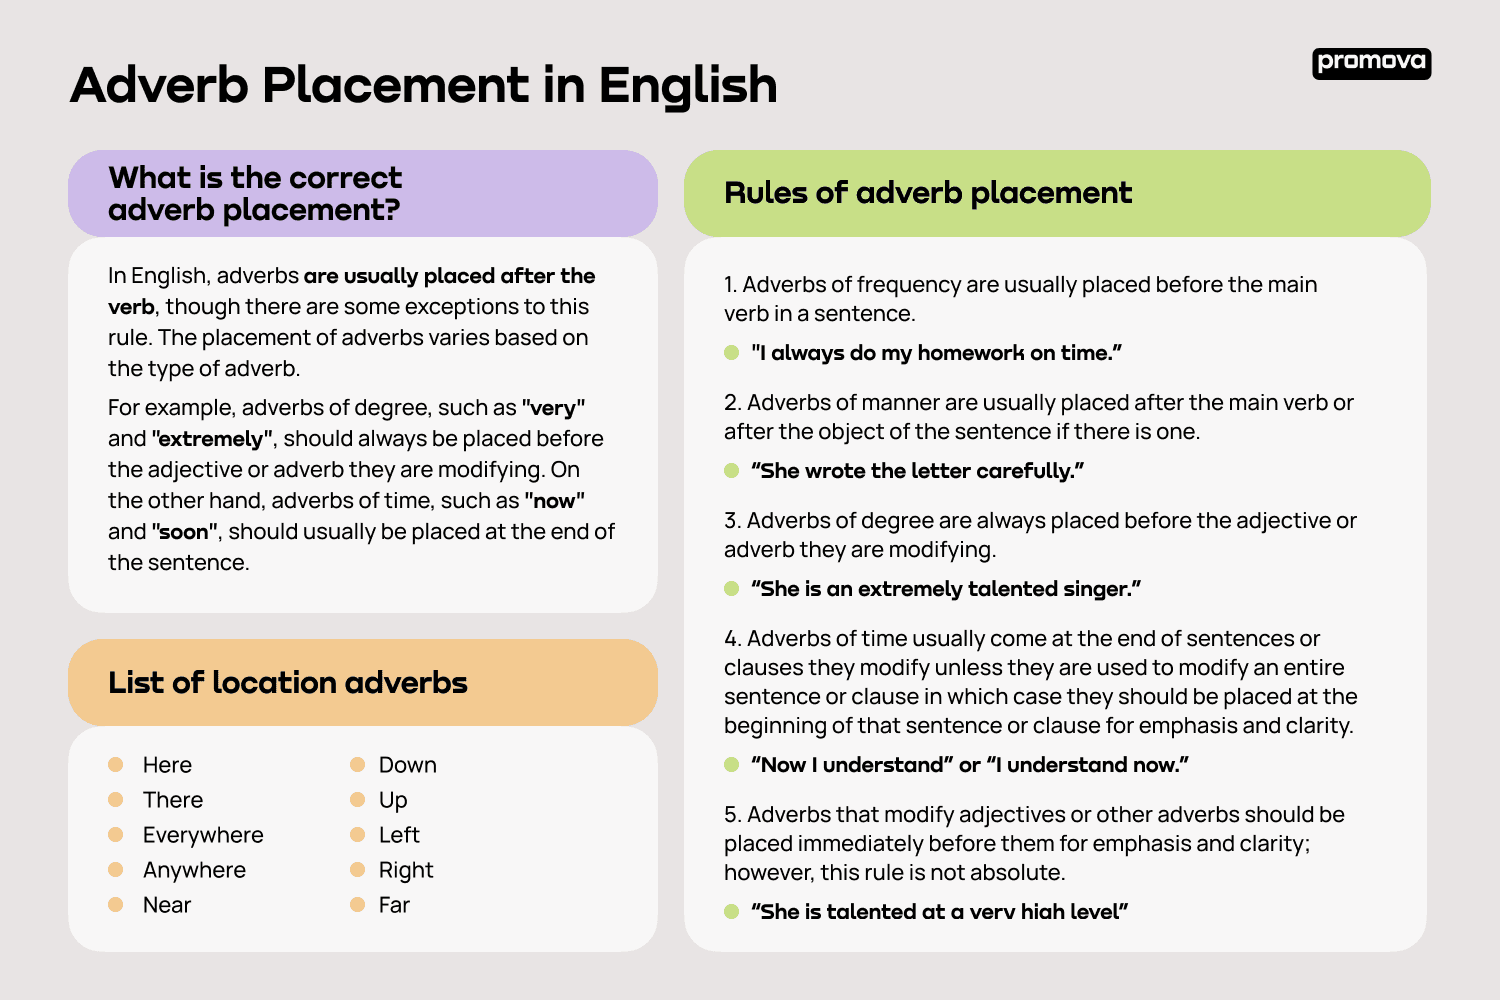 Rules of adverb placement